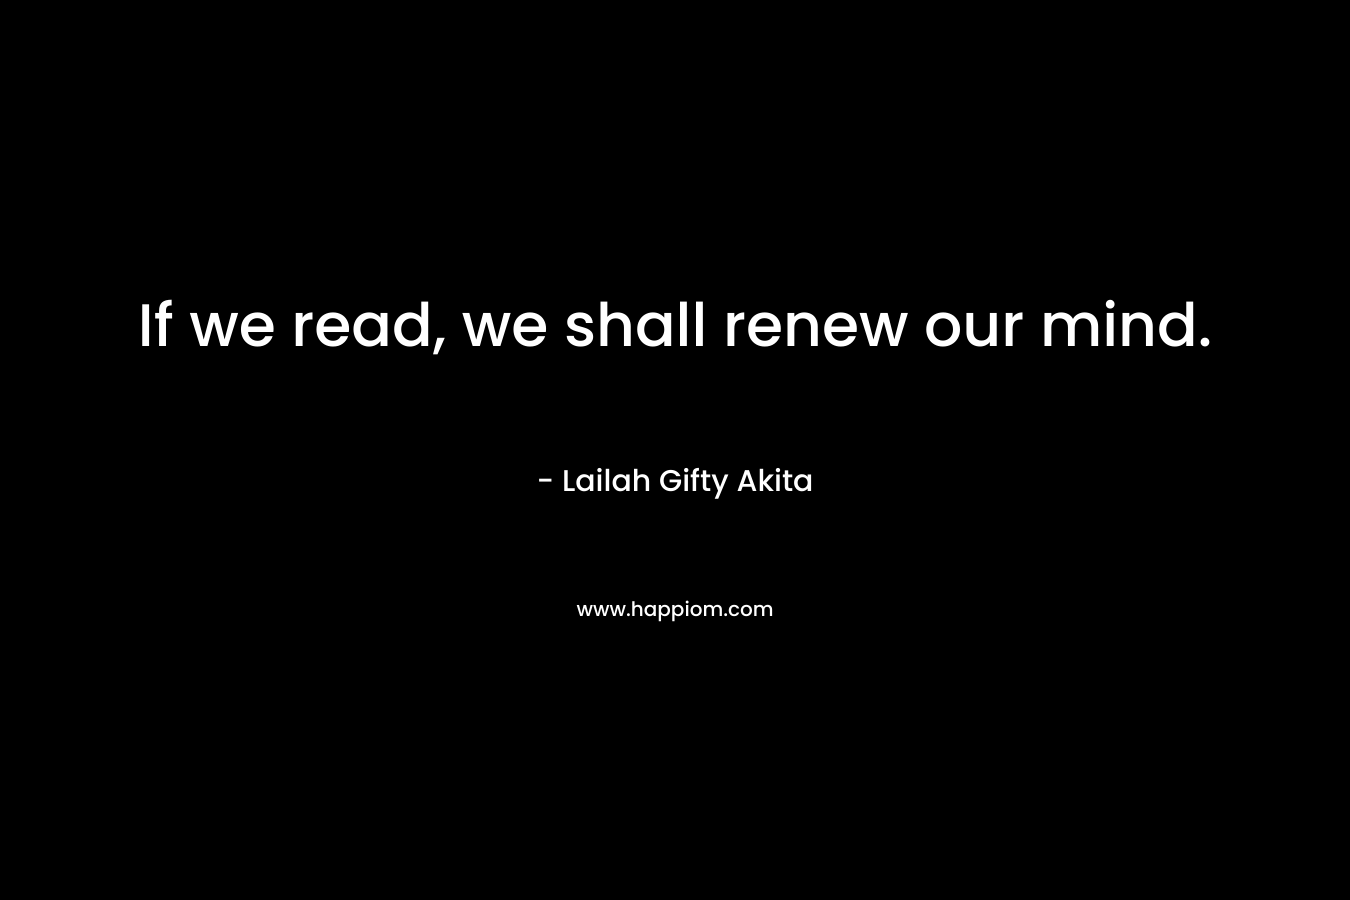 If we read, we shall renew our mind.